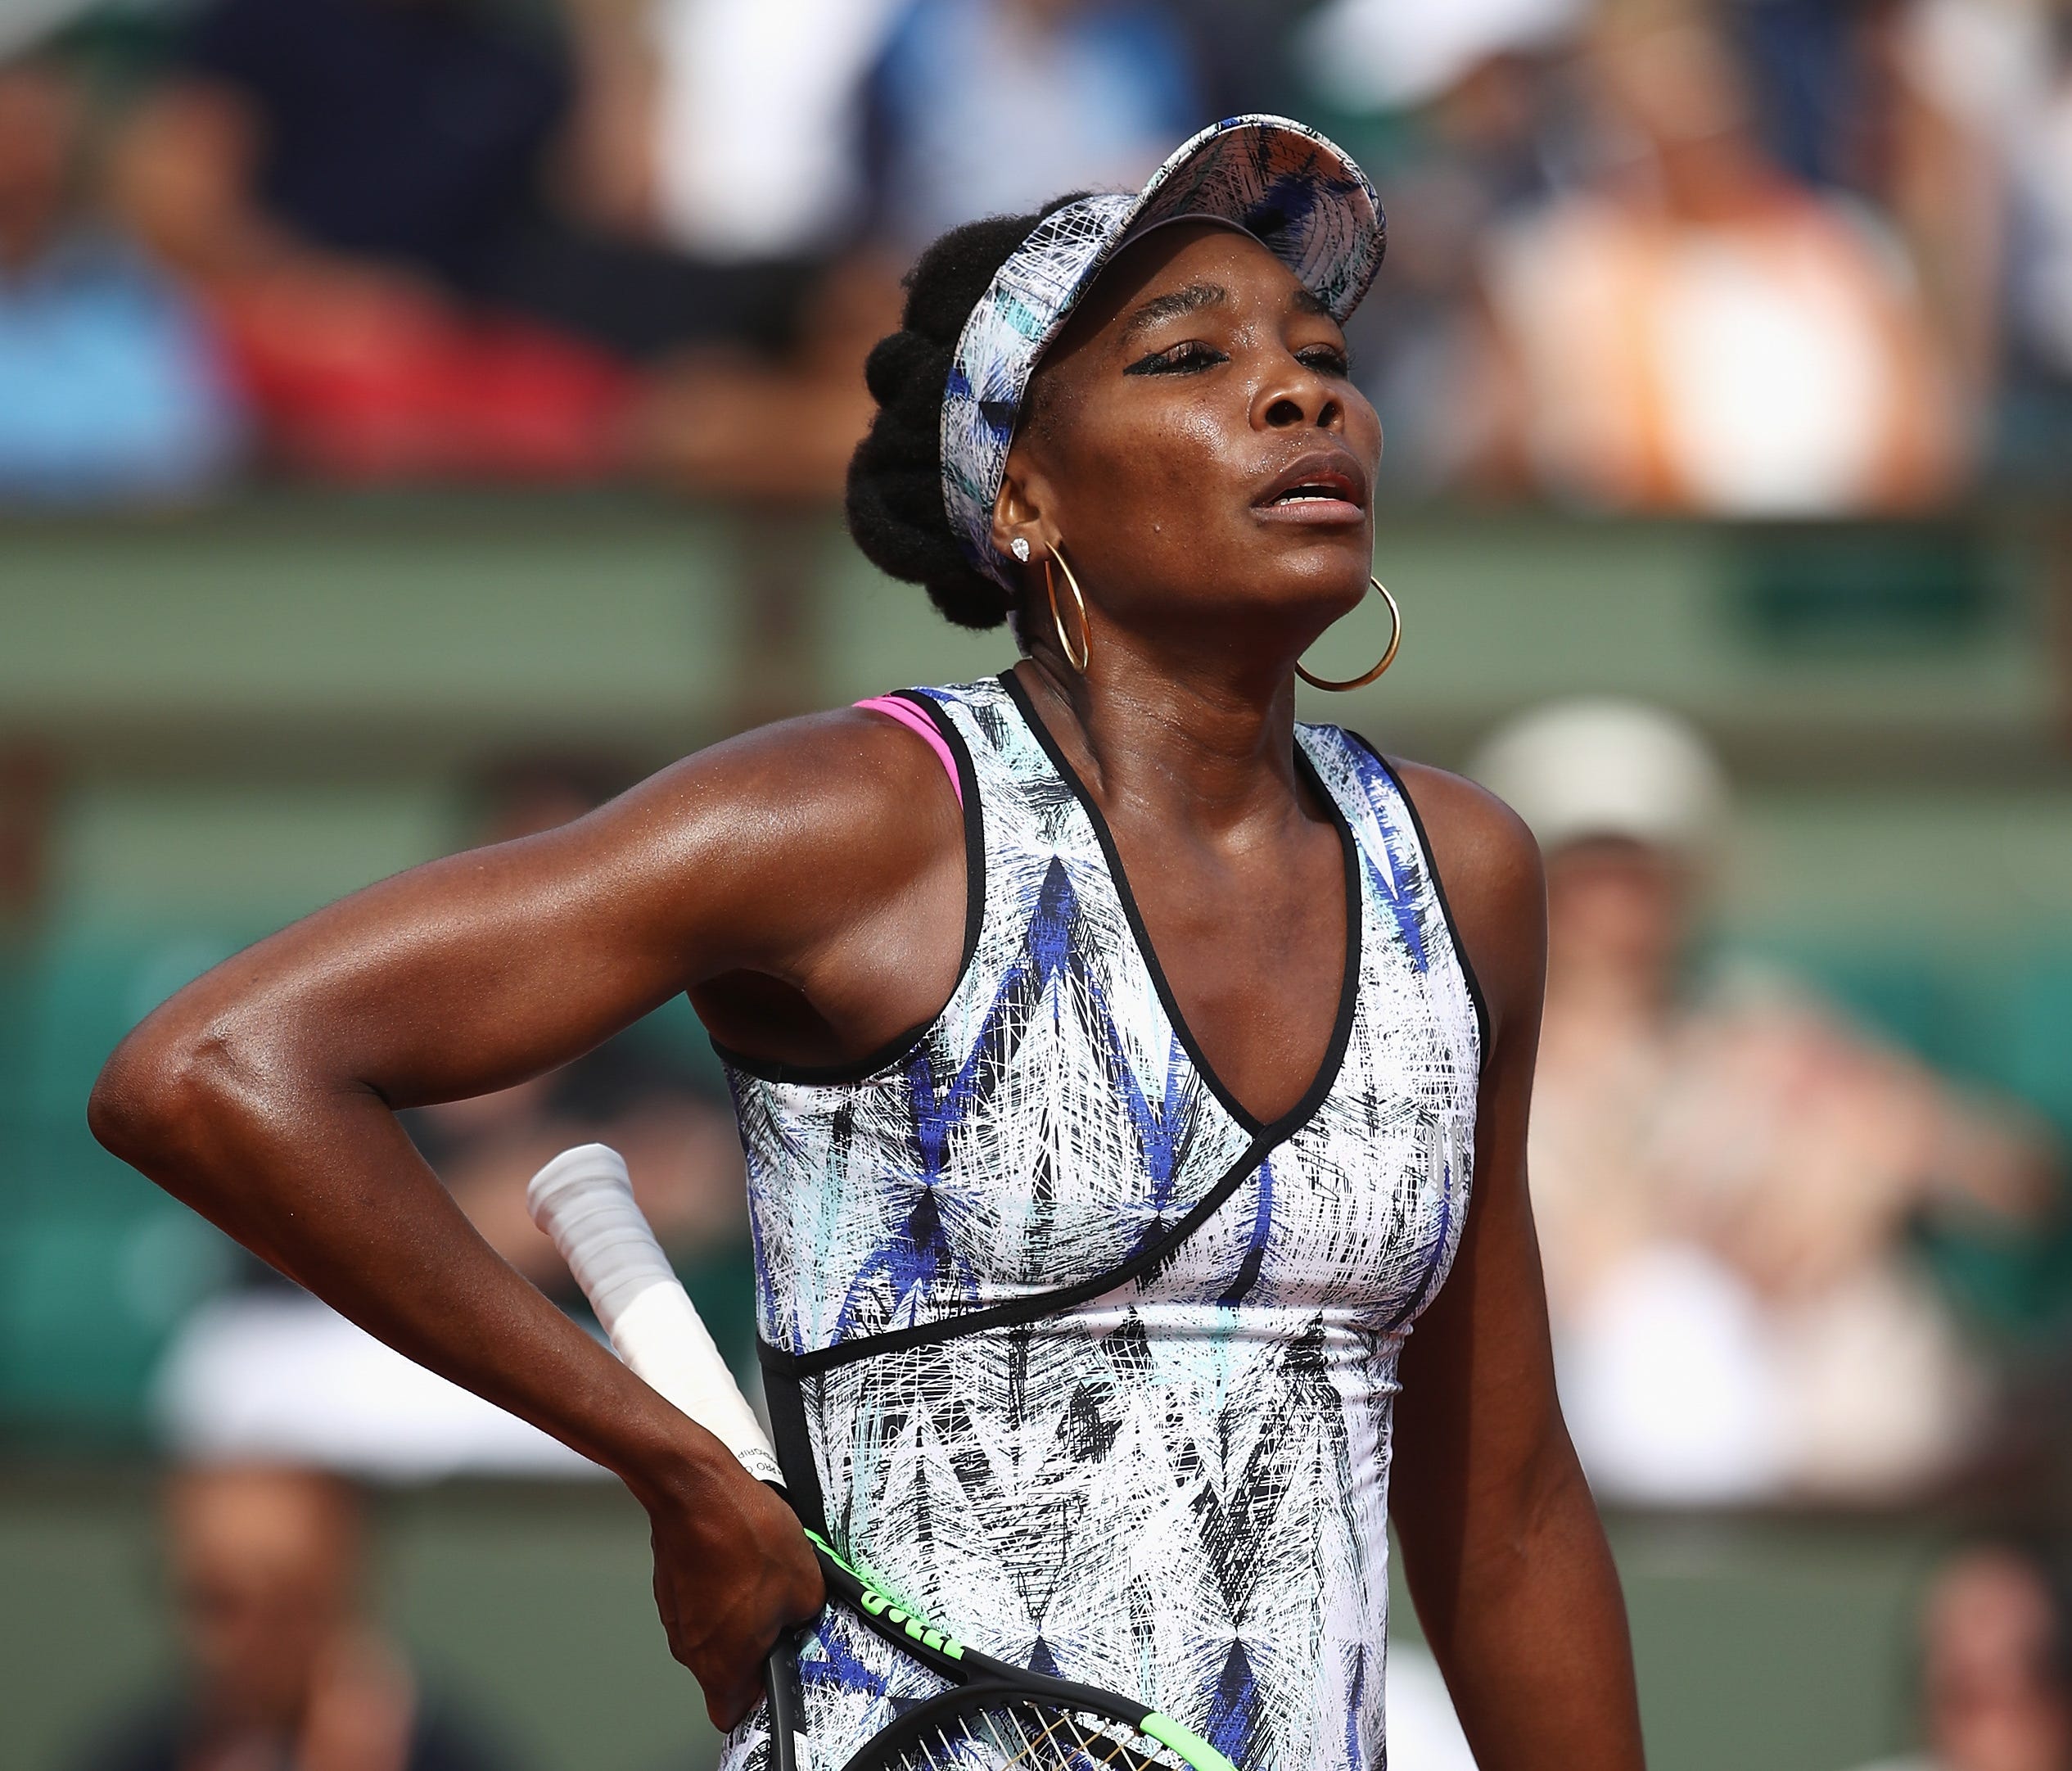 Venus Williams of the United States reacts in her women's singles fourth round match against Timea Bacsinszky of Switzerland during day eight of the French Open at Roland Garros on June 4, 2017 in Paris.